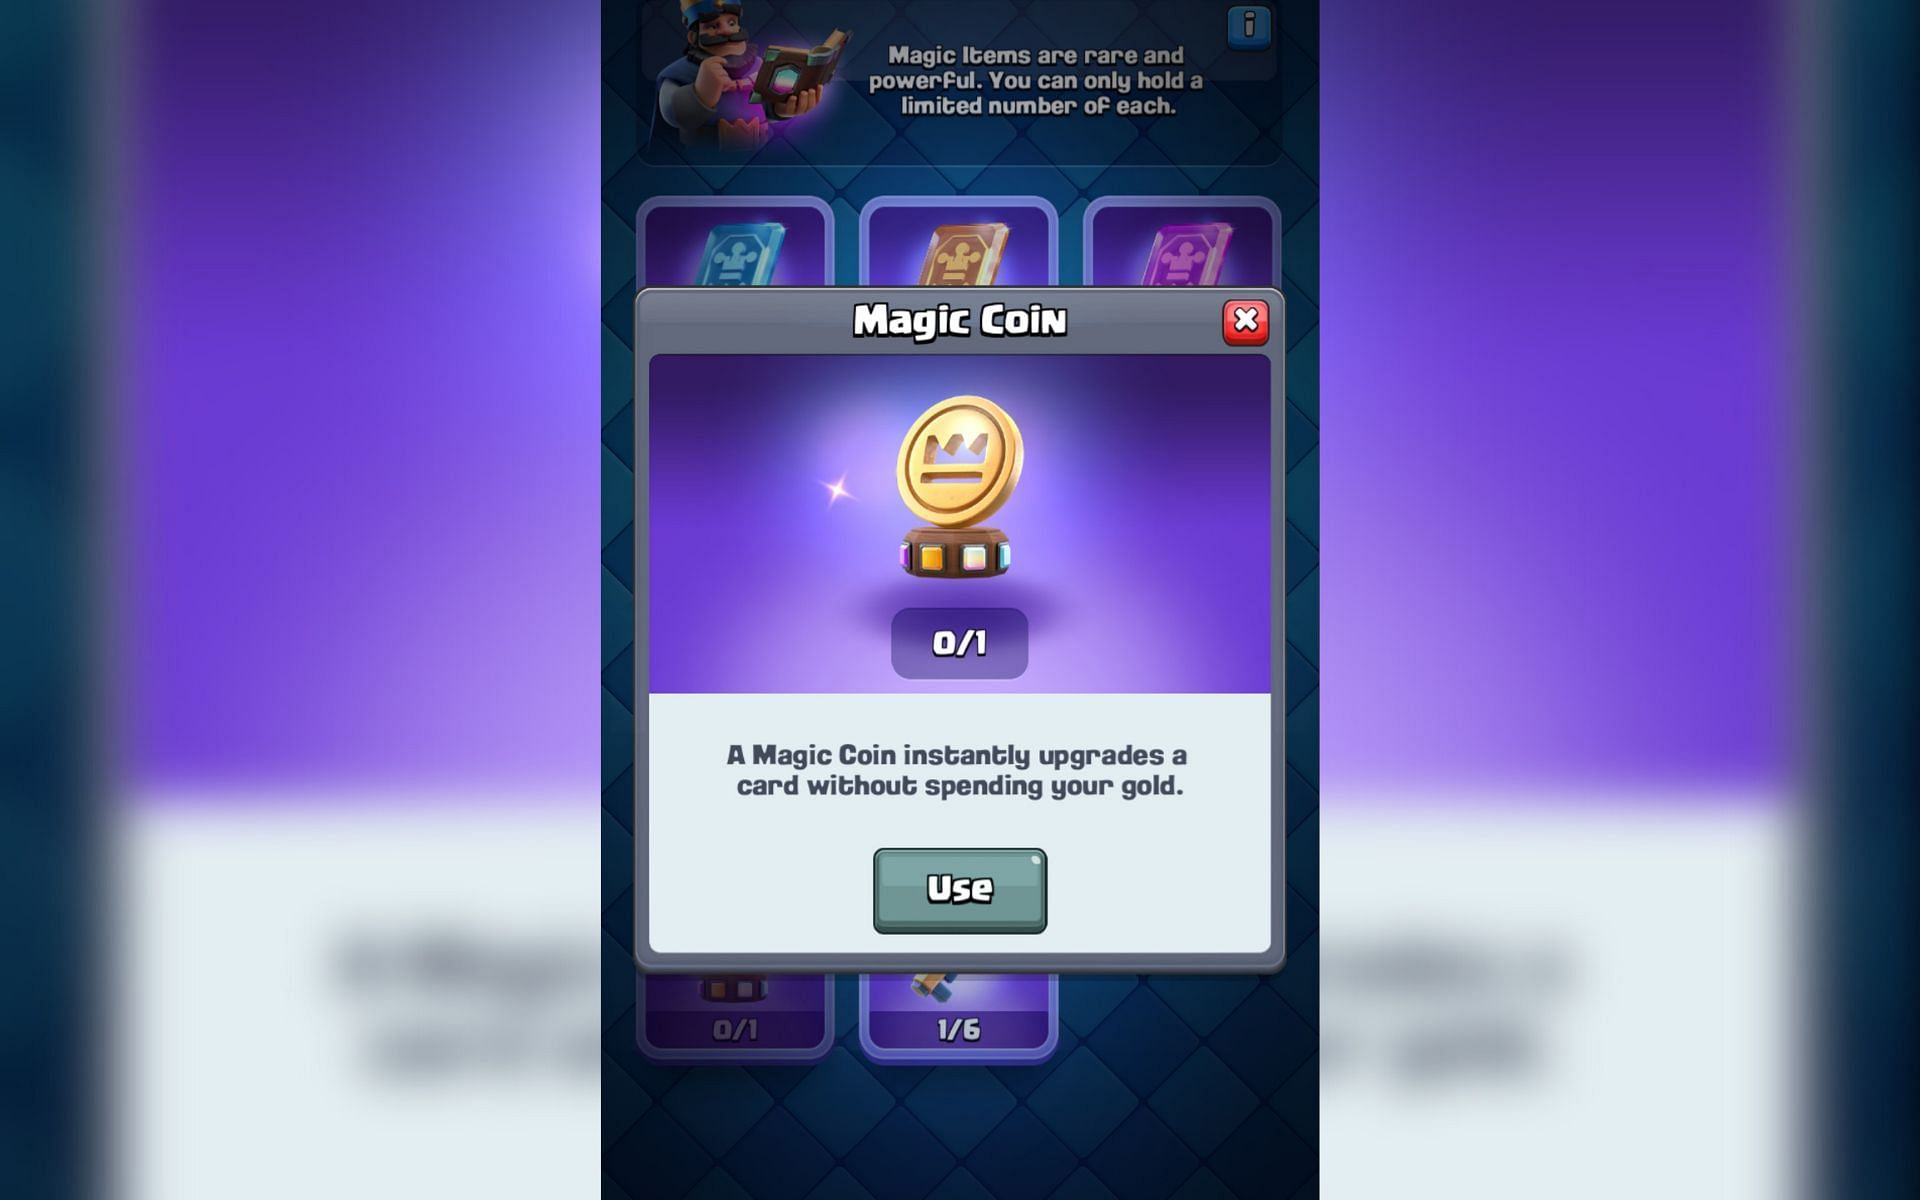 How to use Magic Coins in Clash Royale